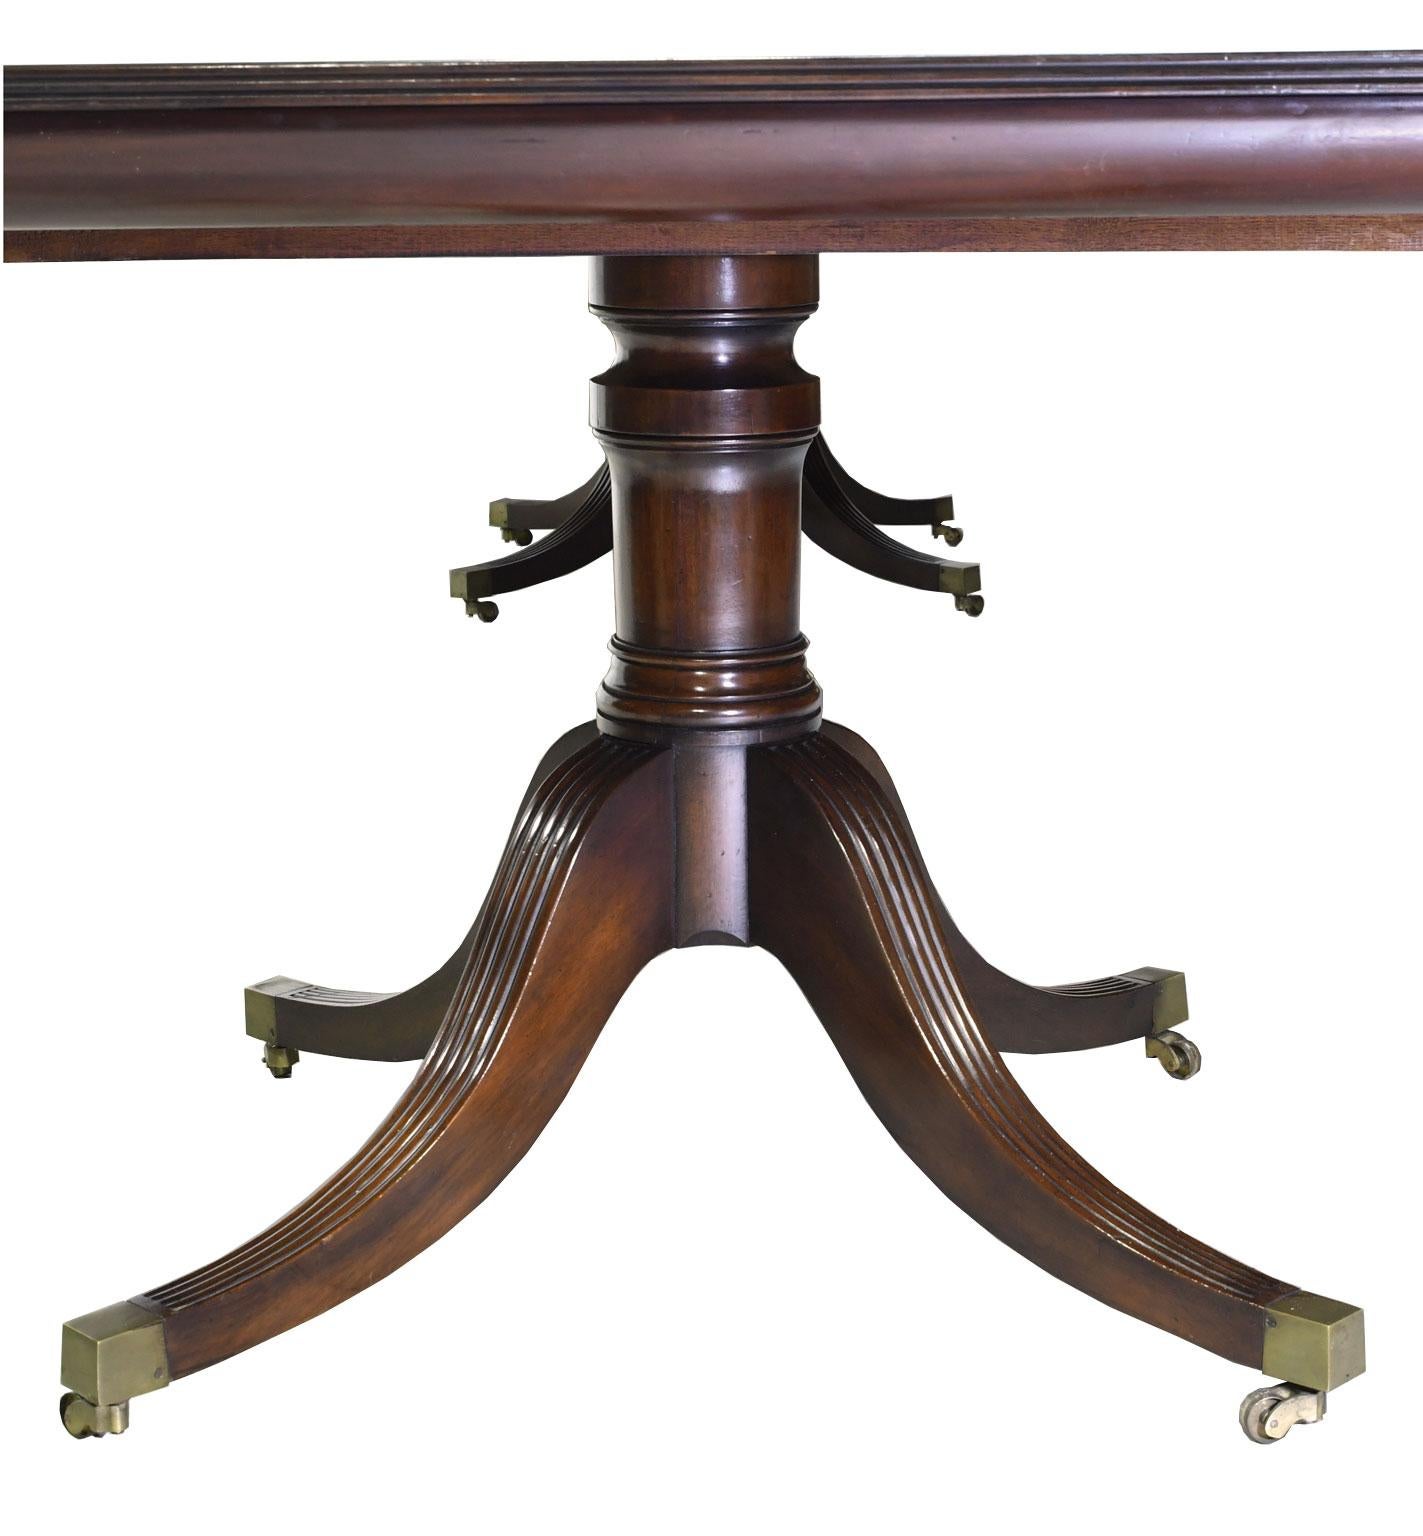 12' Hepplewhite-Style Dining Table Mahogany, 2 Pedestals, 3 Leaves, circa 1945 1